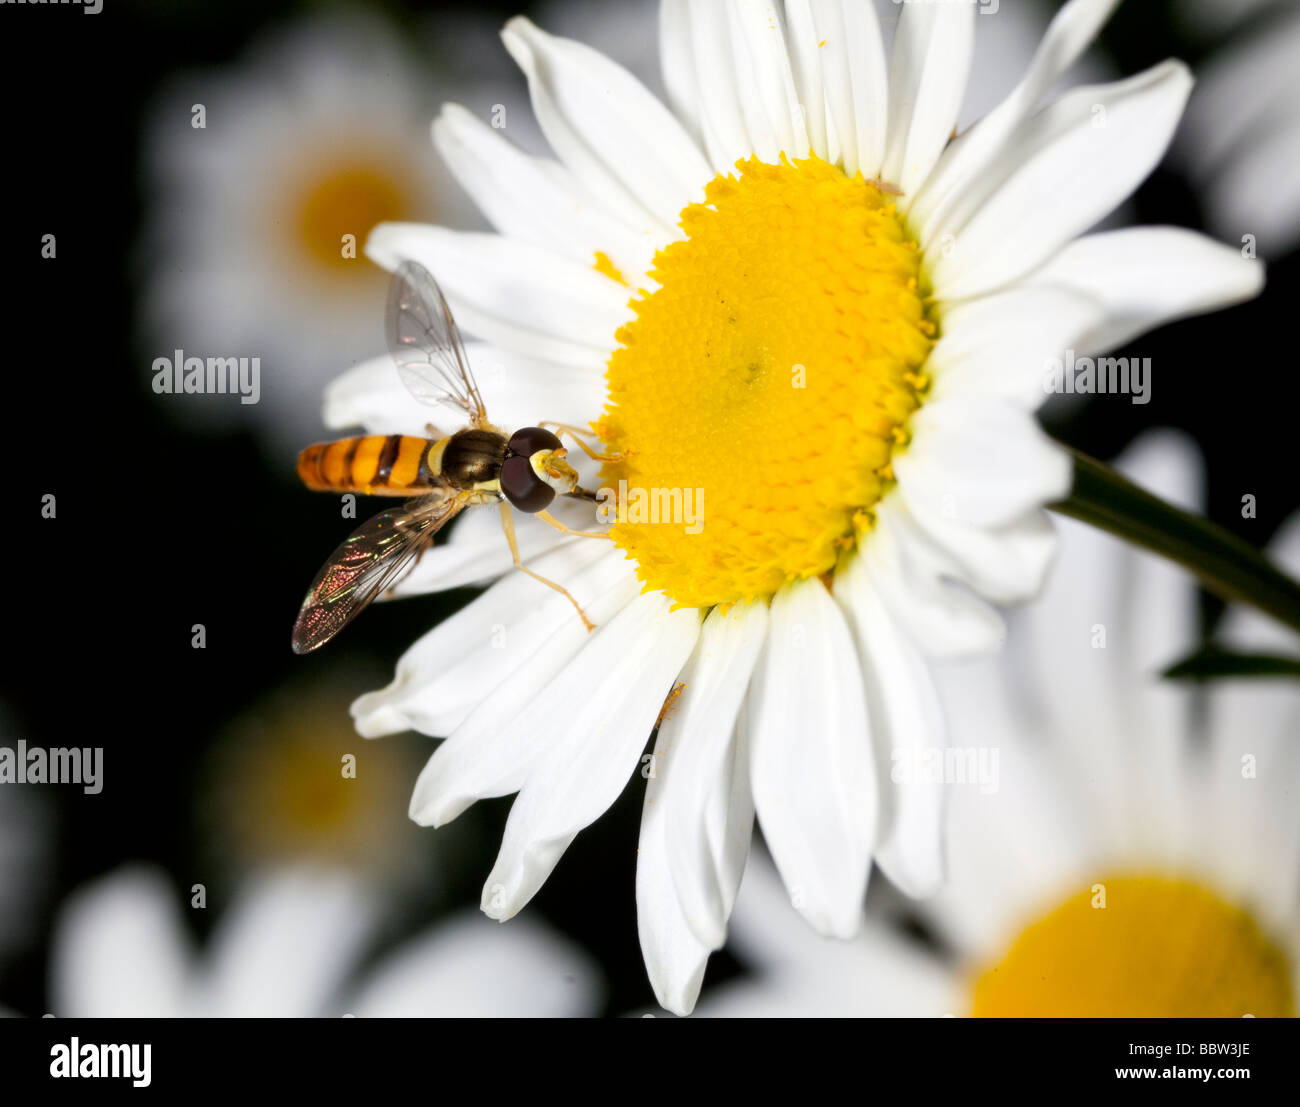 Bee gathering pollen sur oxeye daisy Banque D'Images